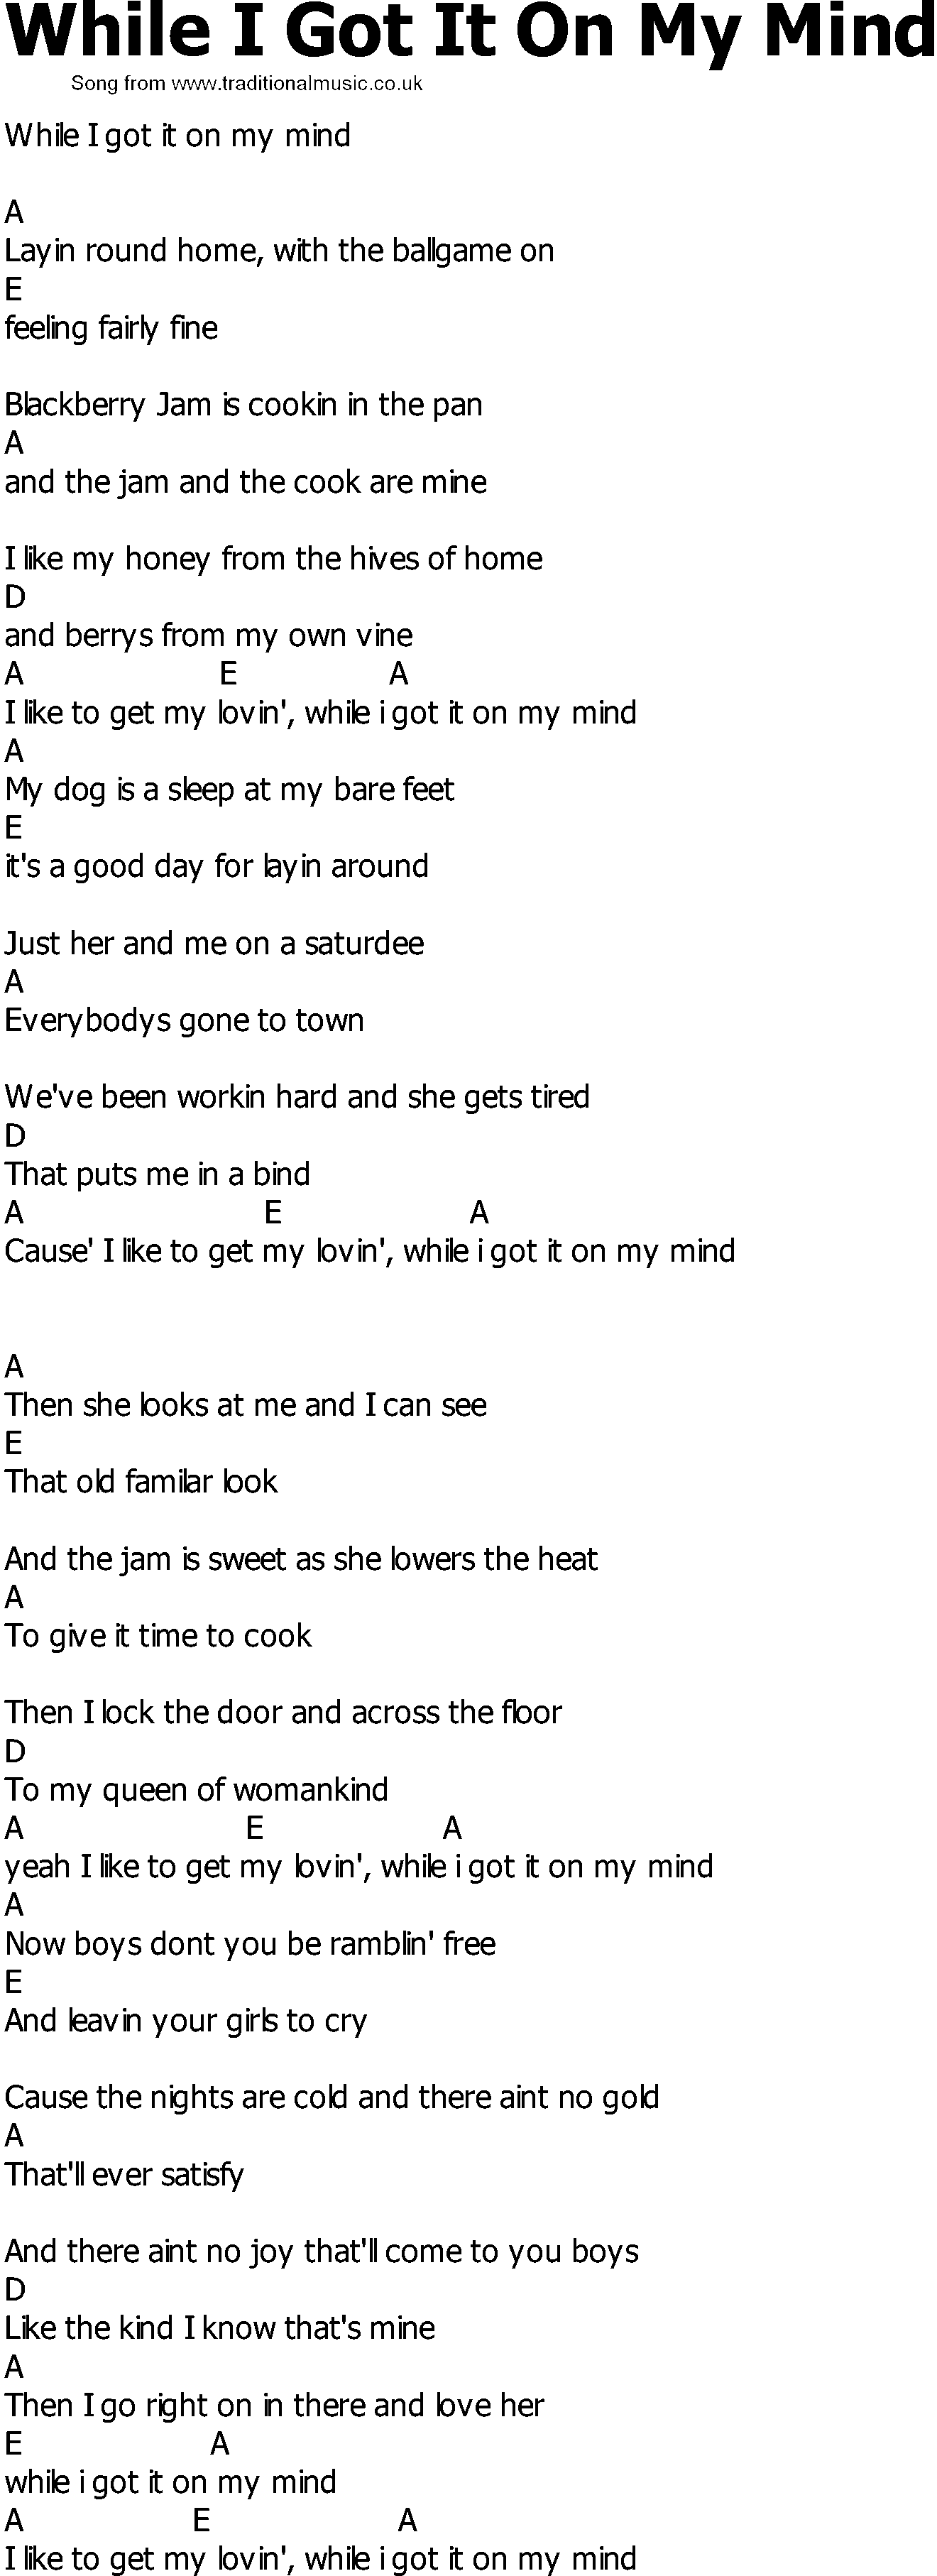 Old Country song lyrics with chords - While I Got It On My Mind